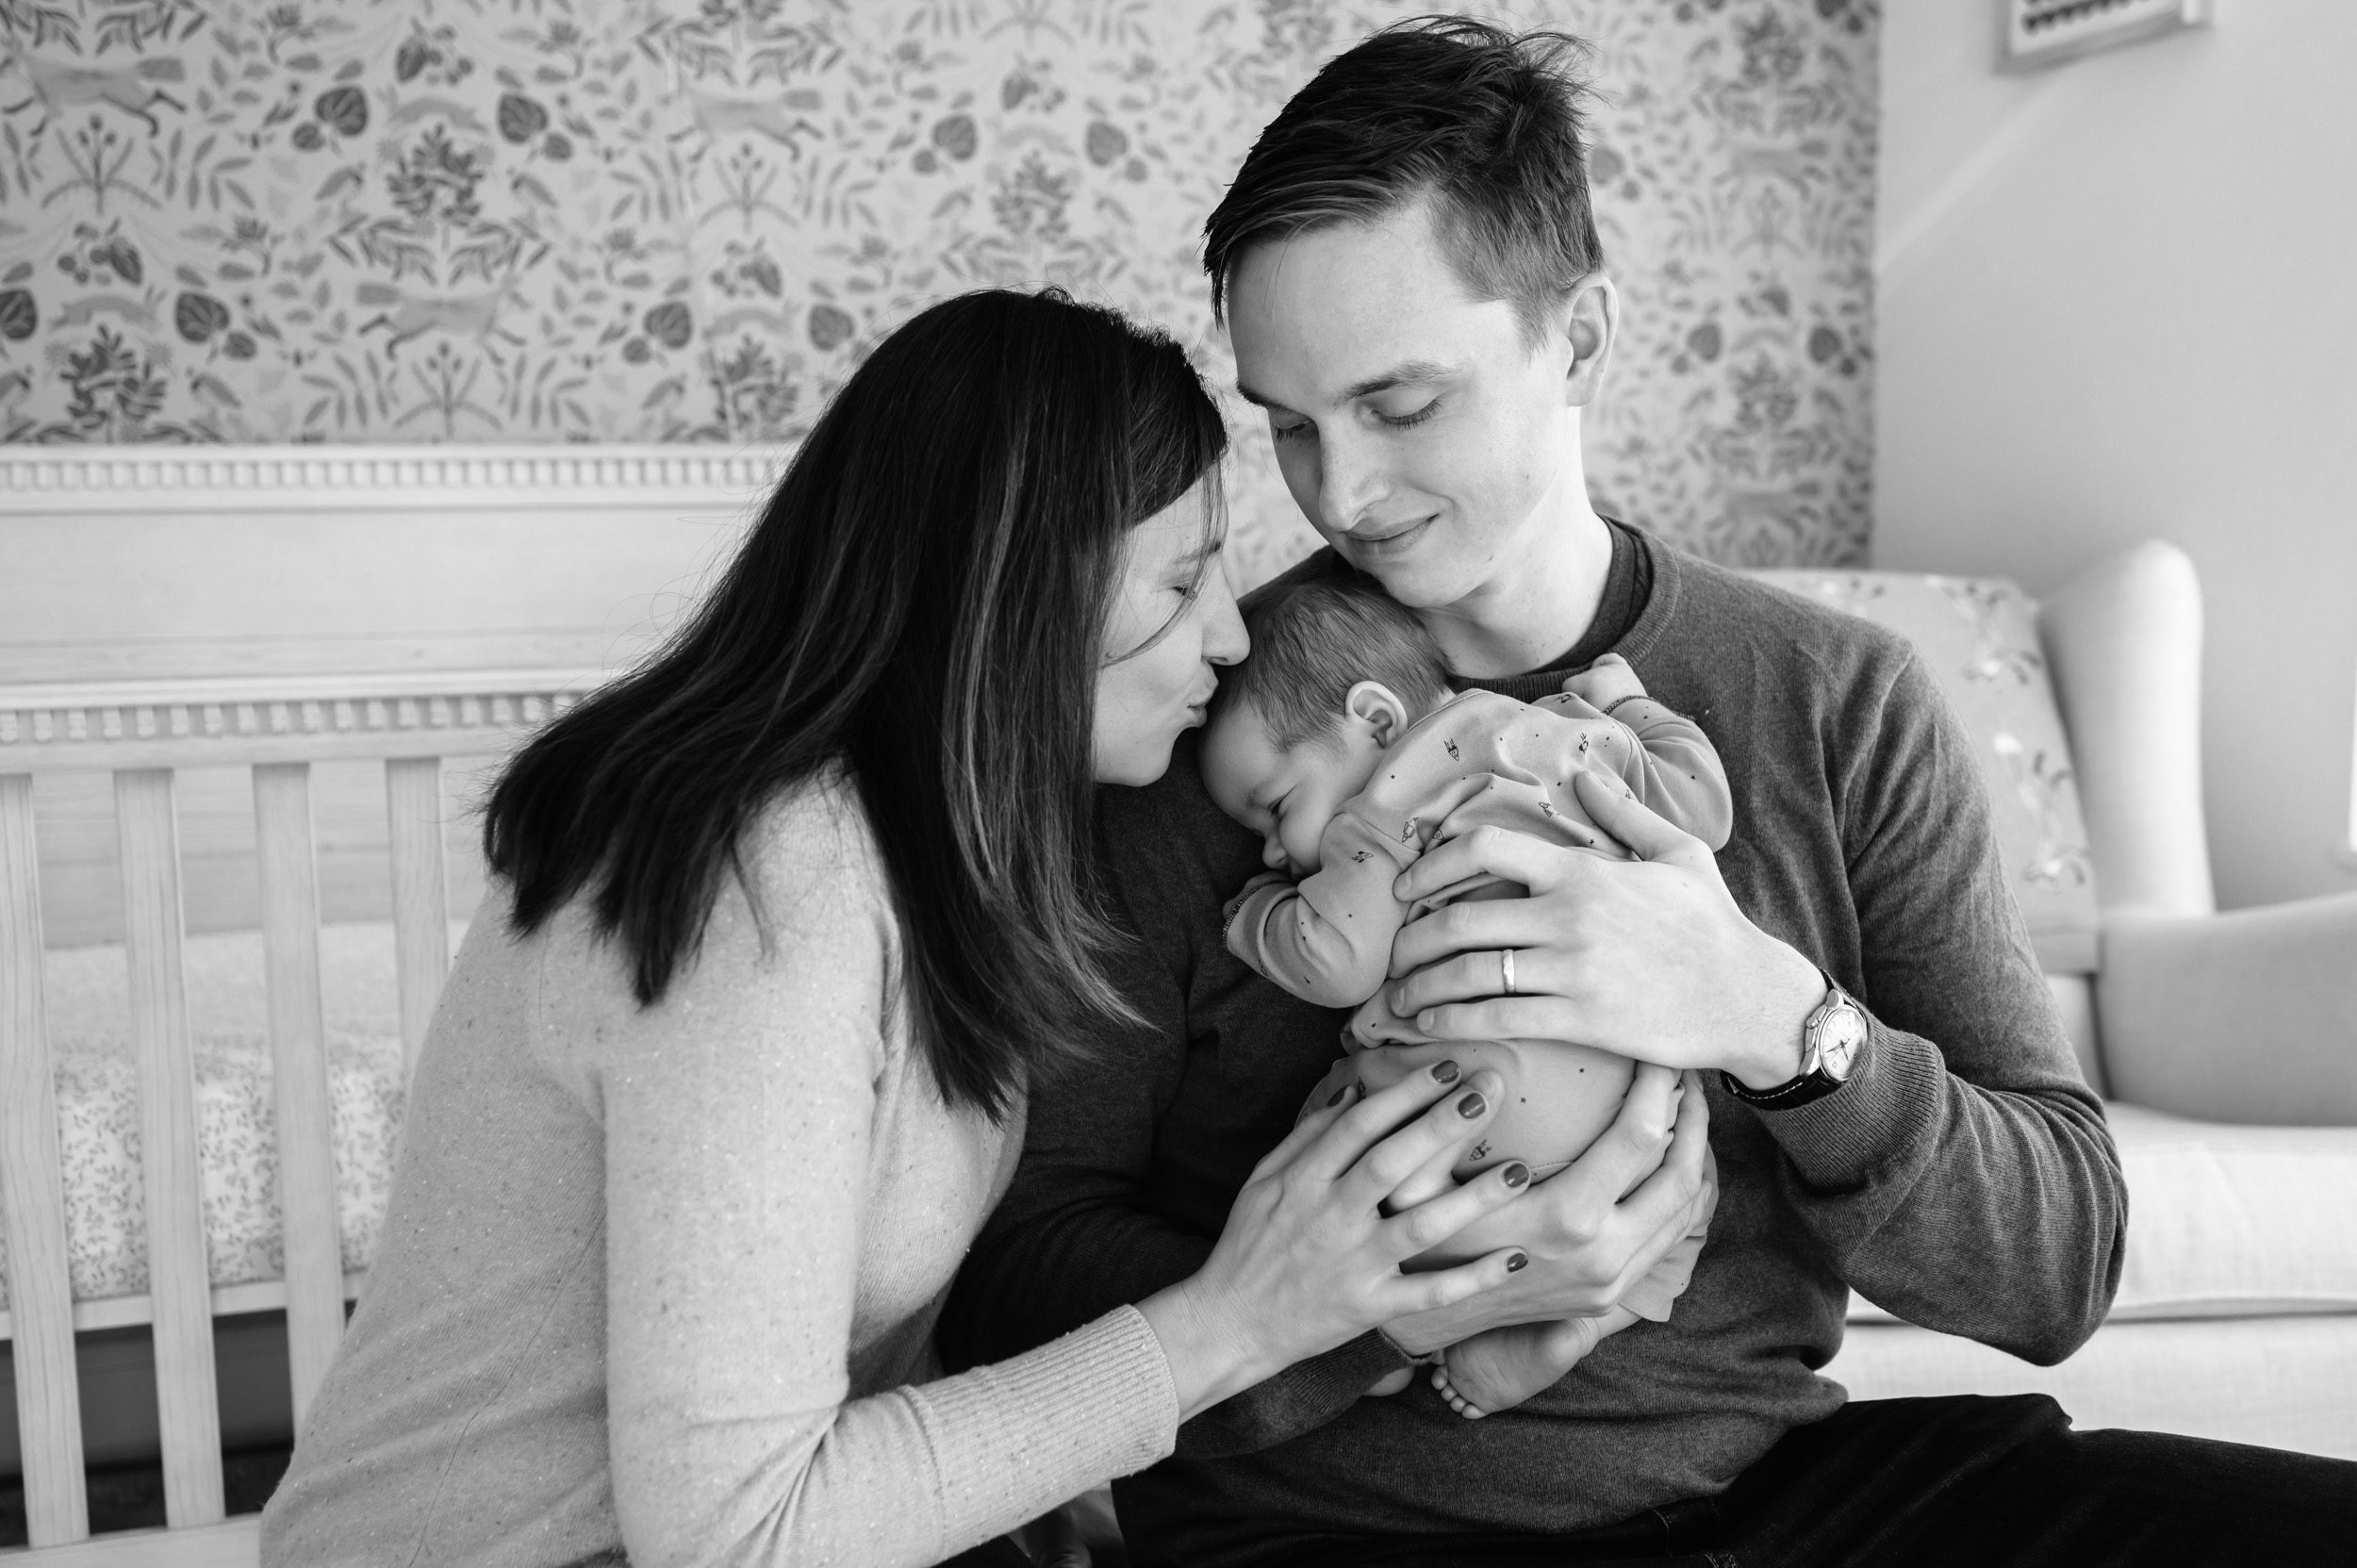 Black and white picture of a dad holding his newborn son while mom kisses him on the head during a home newborn photo session